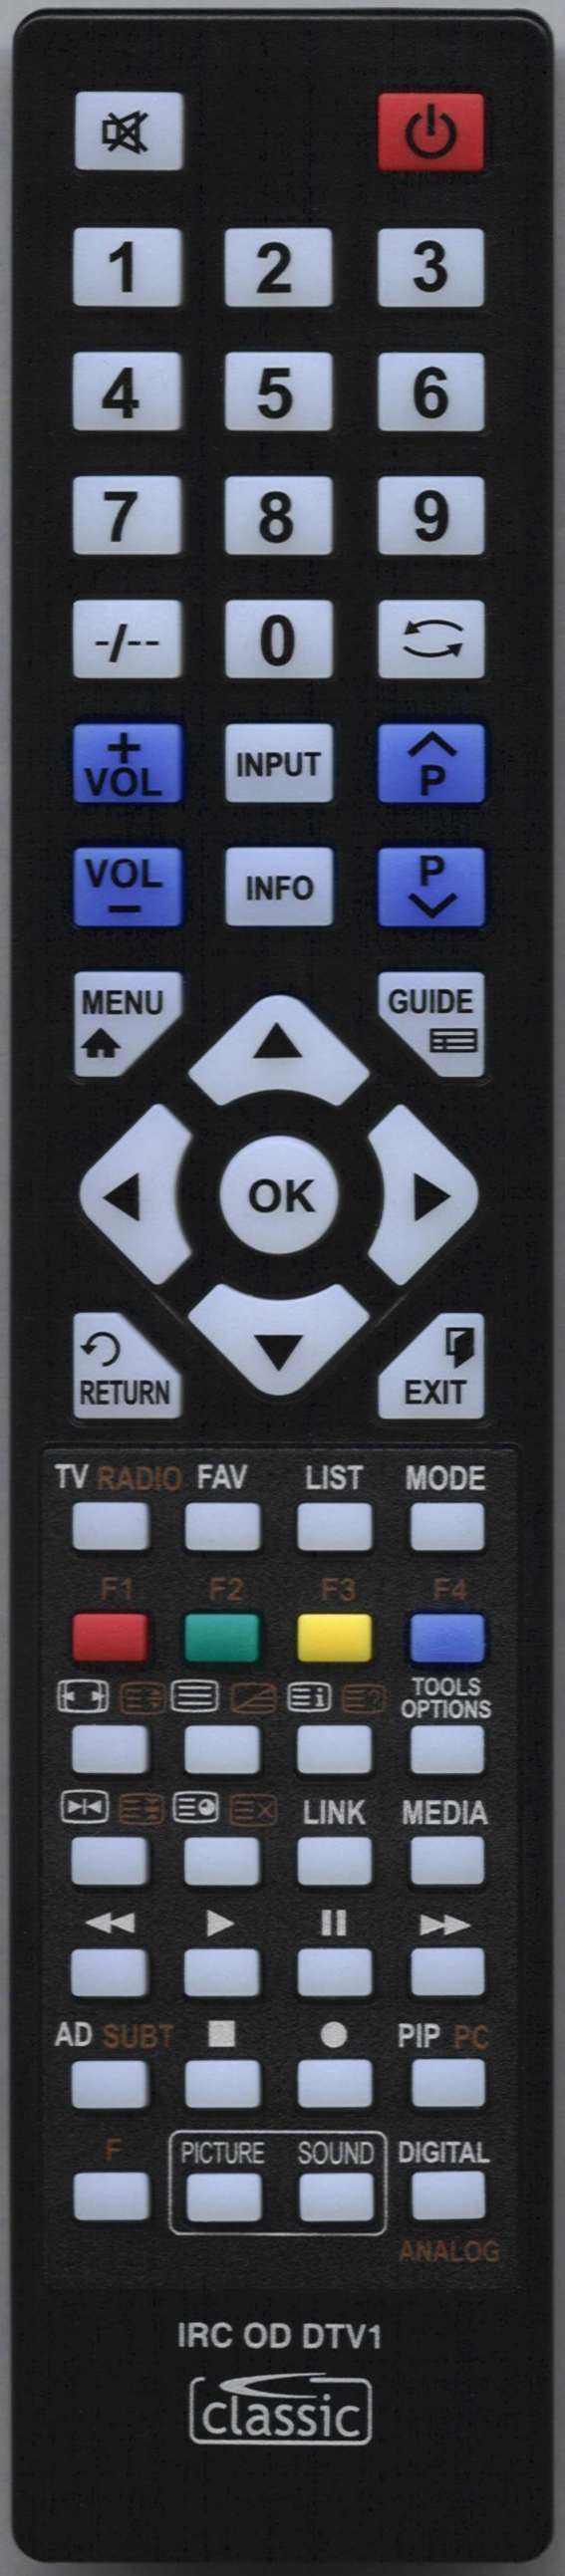 Orion TV19LW500 Remote Control